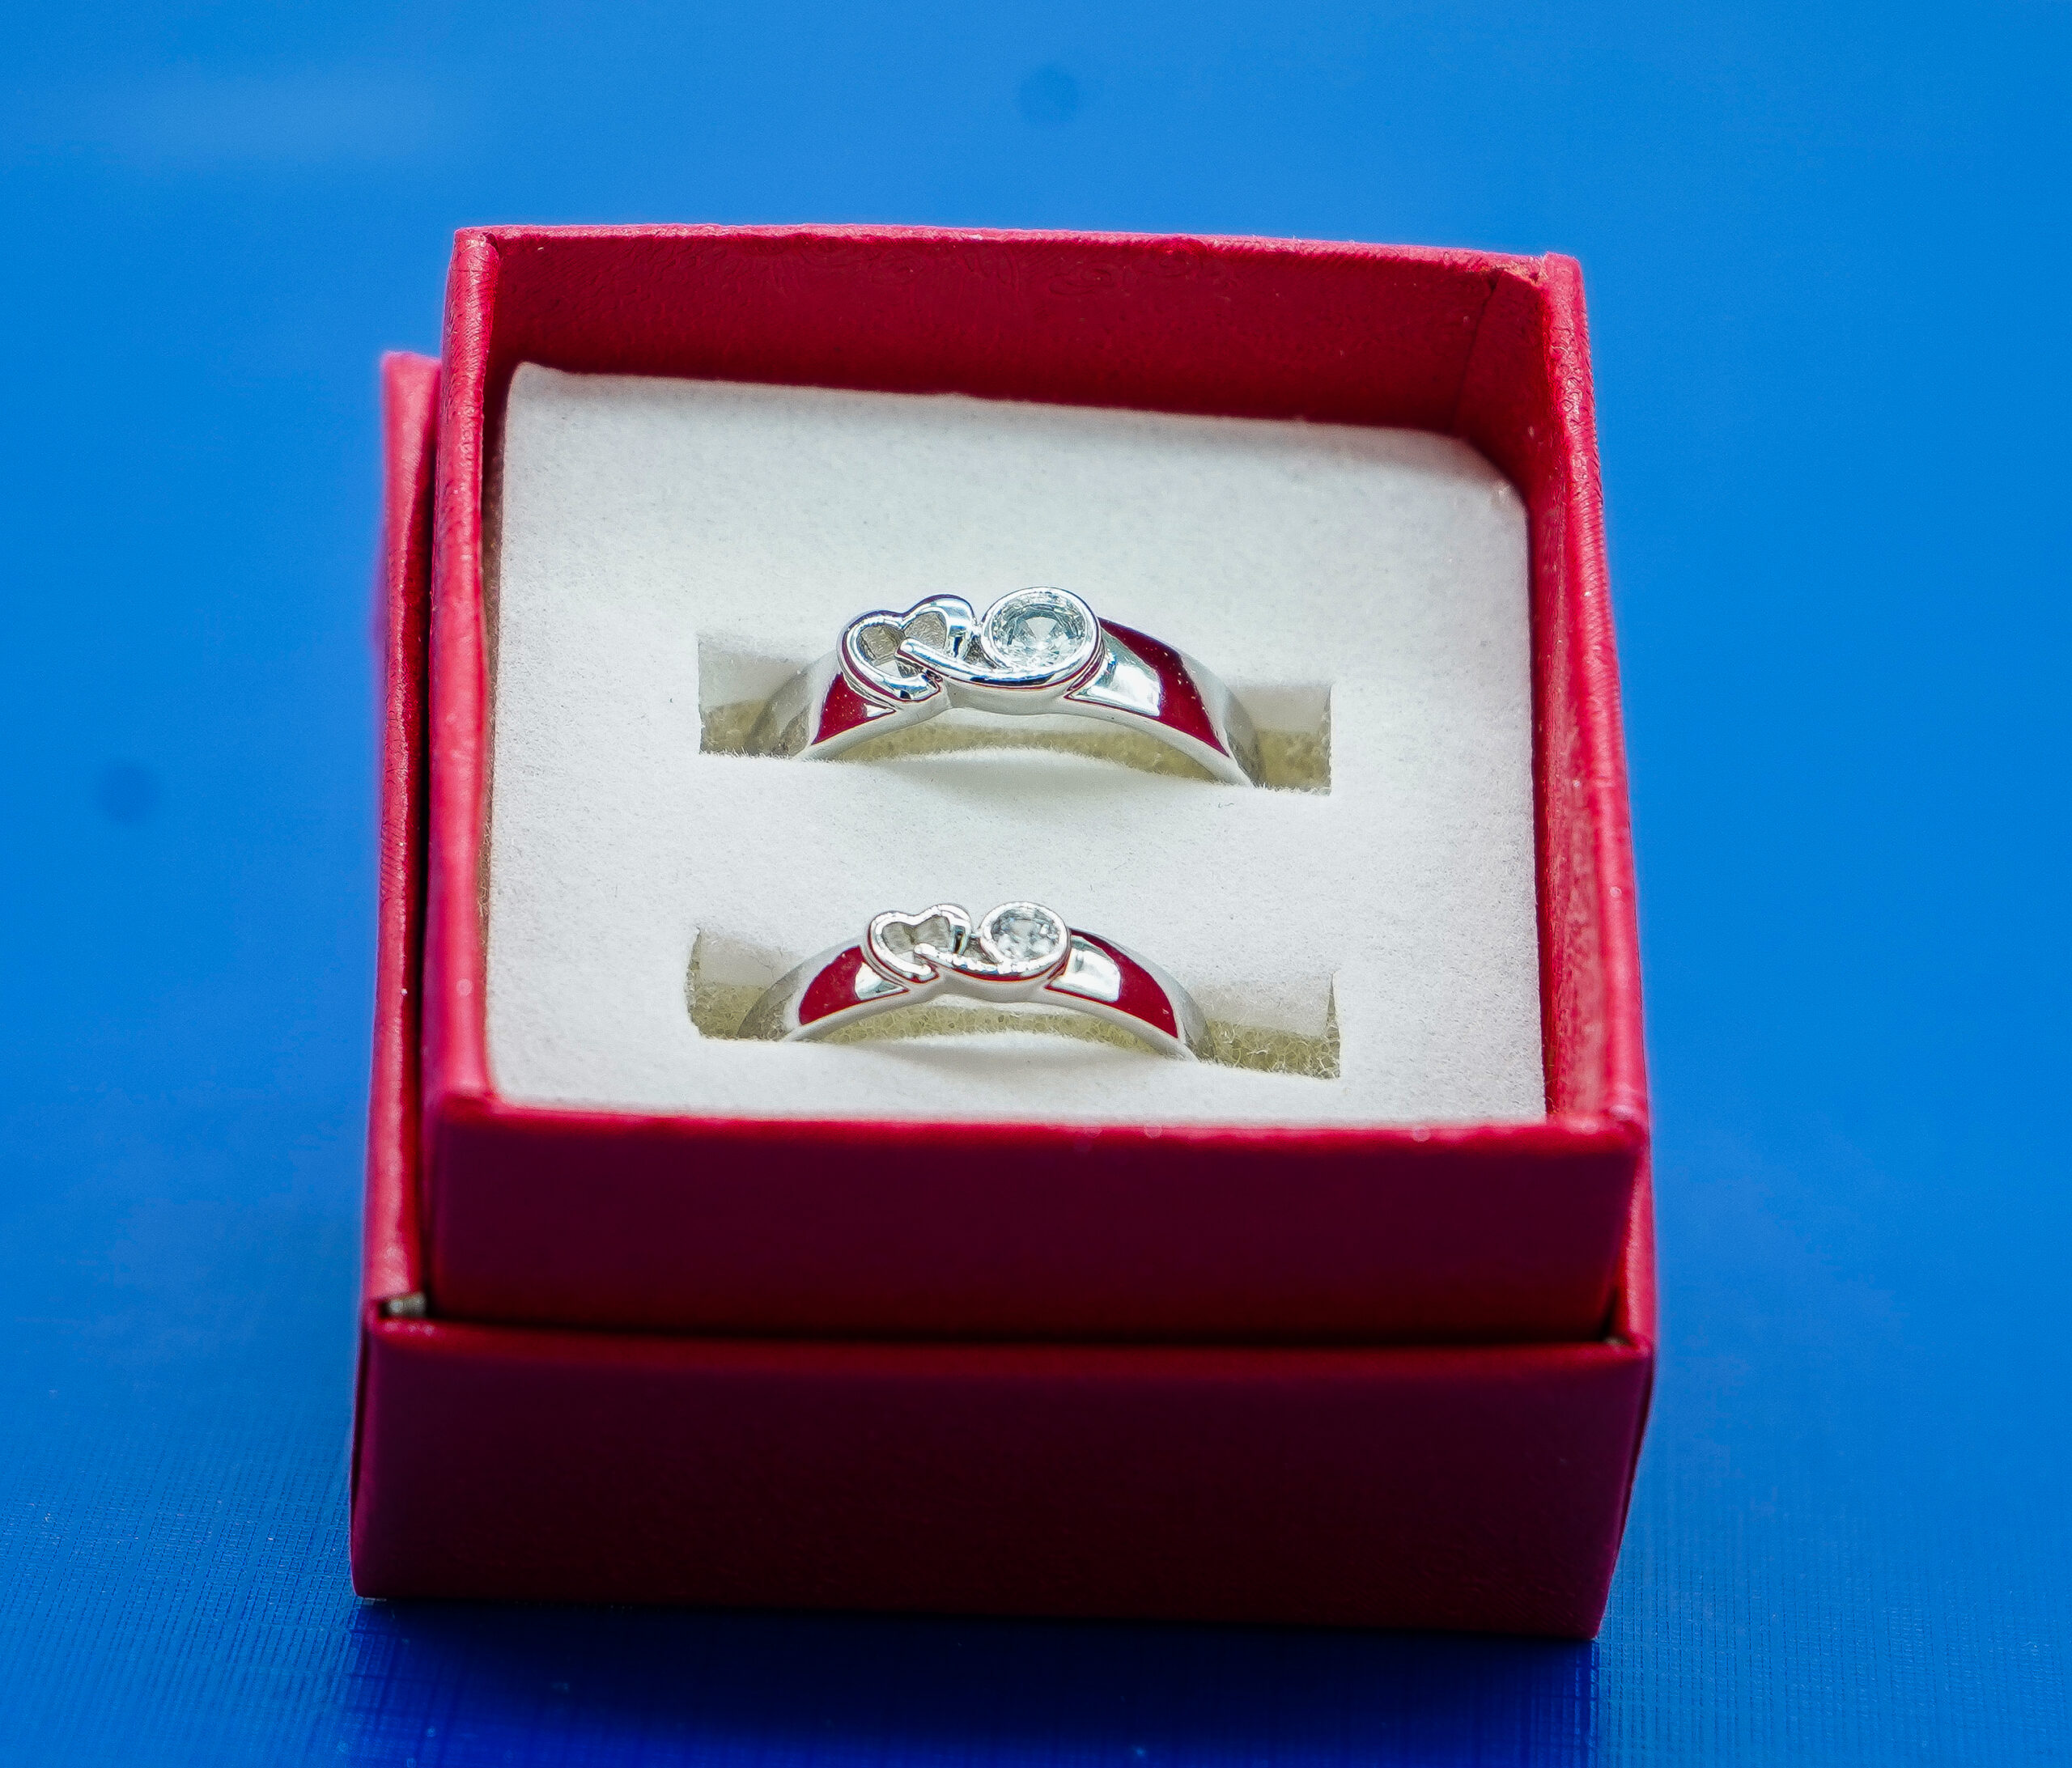 Fashion Couple Ring for Love @ Best Price Online | Jumia Egypt